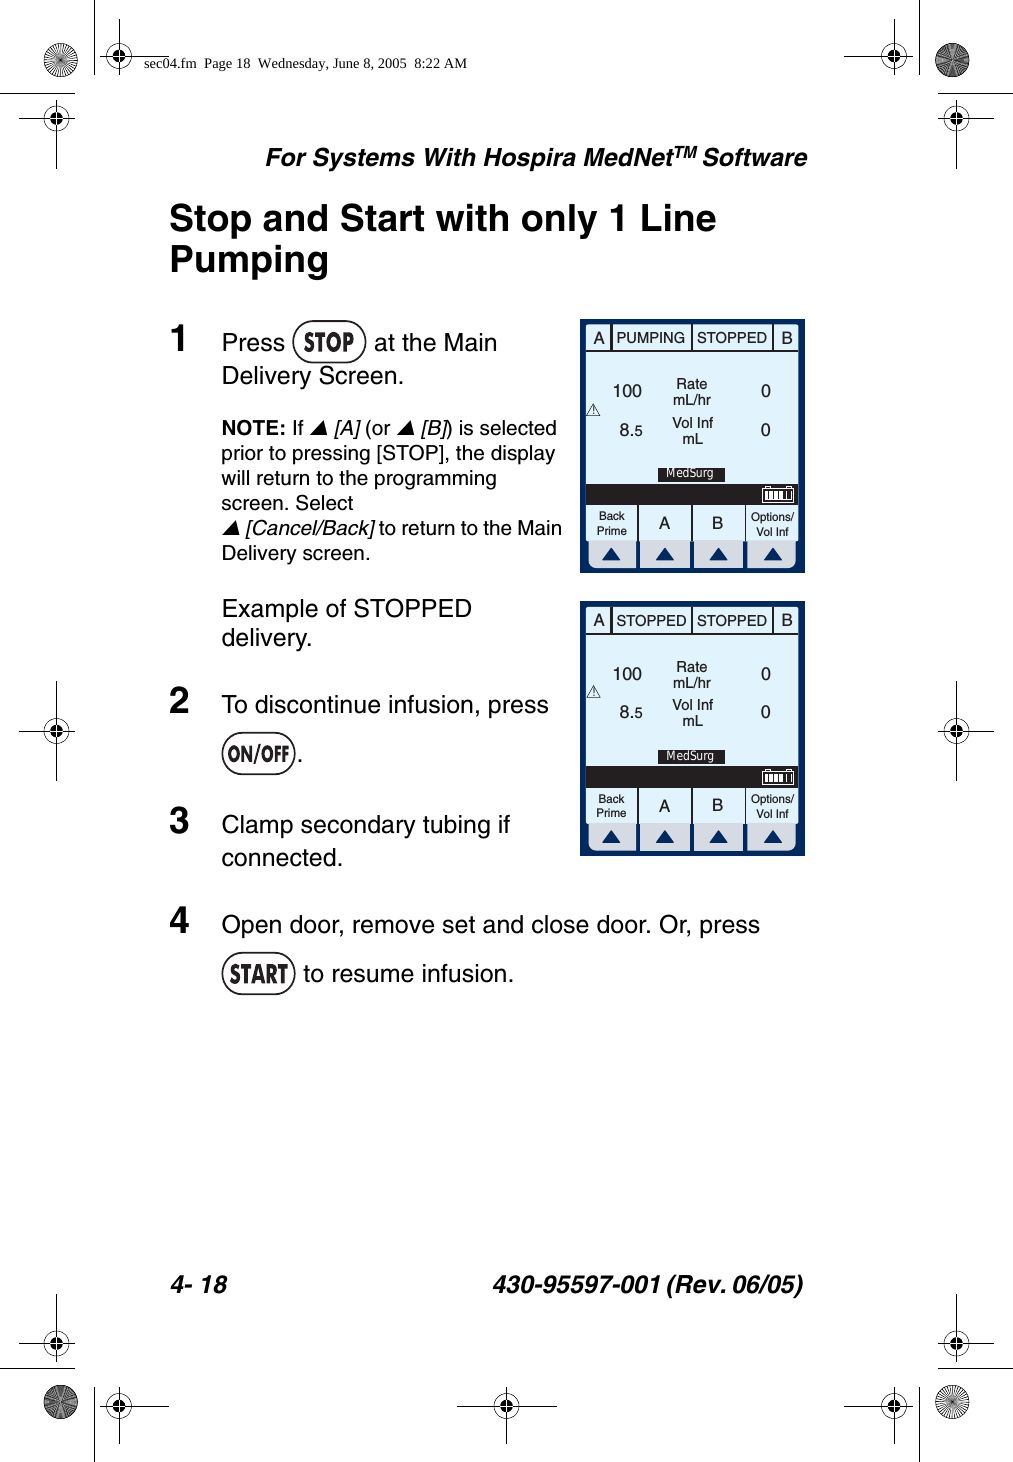 For Systems With Hospira MedNetTM Software4- 18 430-95597-001 (Rev. 06/05) Stop and Start with only 1 Line Pumping1Press   at the Main Delivery Screen.NOTE: If  [A] (or  [B]) is selected prior to pressing [STOP], the display will return to the programming screen. Select  [Cancel/Back] to return to the Main Delivery screen.Example of STOPPED delivery.2To discontinue infusion, press .3Clamp secondary tubing if connected.4Open door, remove set and close door. Or, press  to resume infusion.AABBPUMPING STOPPEDRatemL/hrVol InfmLOptions/Vol InfBackPrime1008.500!MedSurgAABBSTOPPED STOPPEDRatemL/hrVol InfmLOptions/Vol InfBackPrime1008.500!MedSurgsec04.fm  Page 18  Wednesday, June 8, 2005  8:22 AM